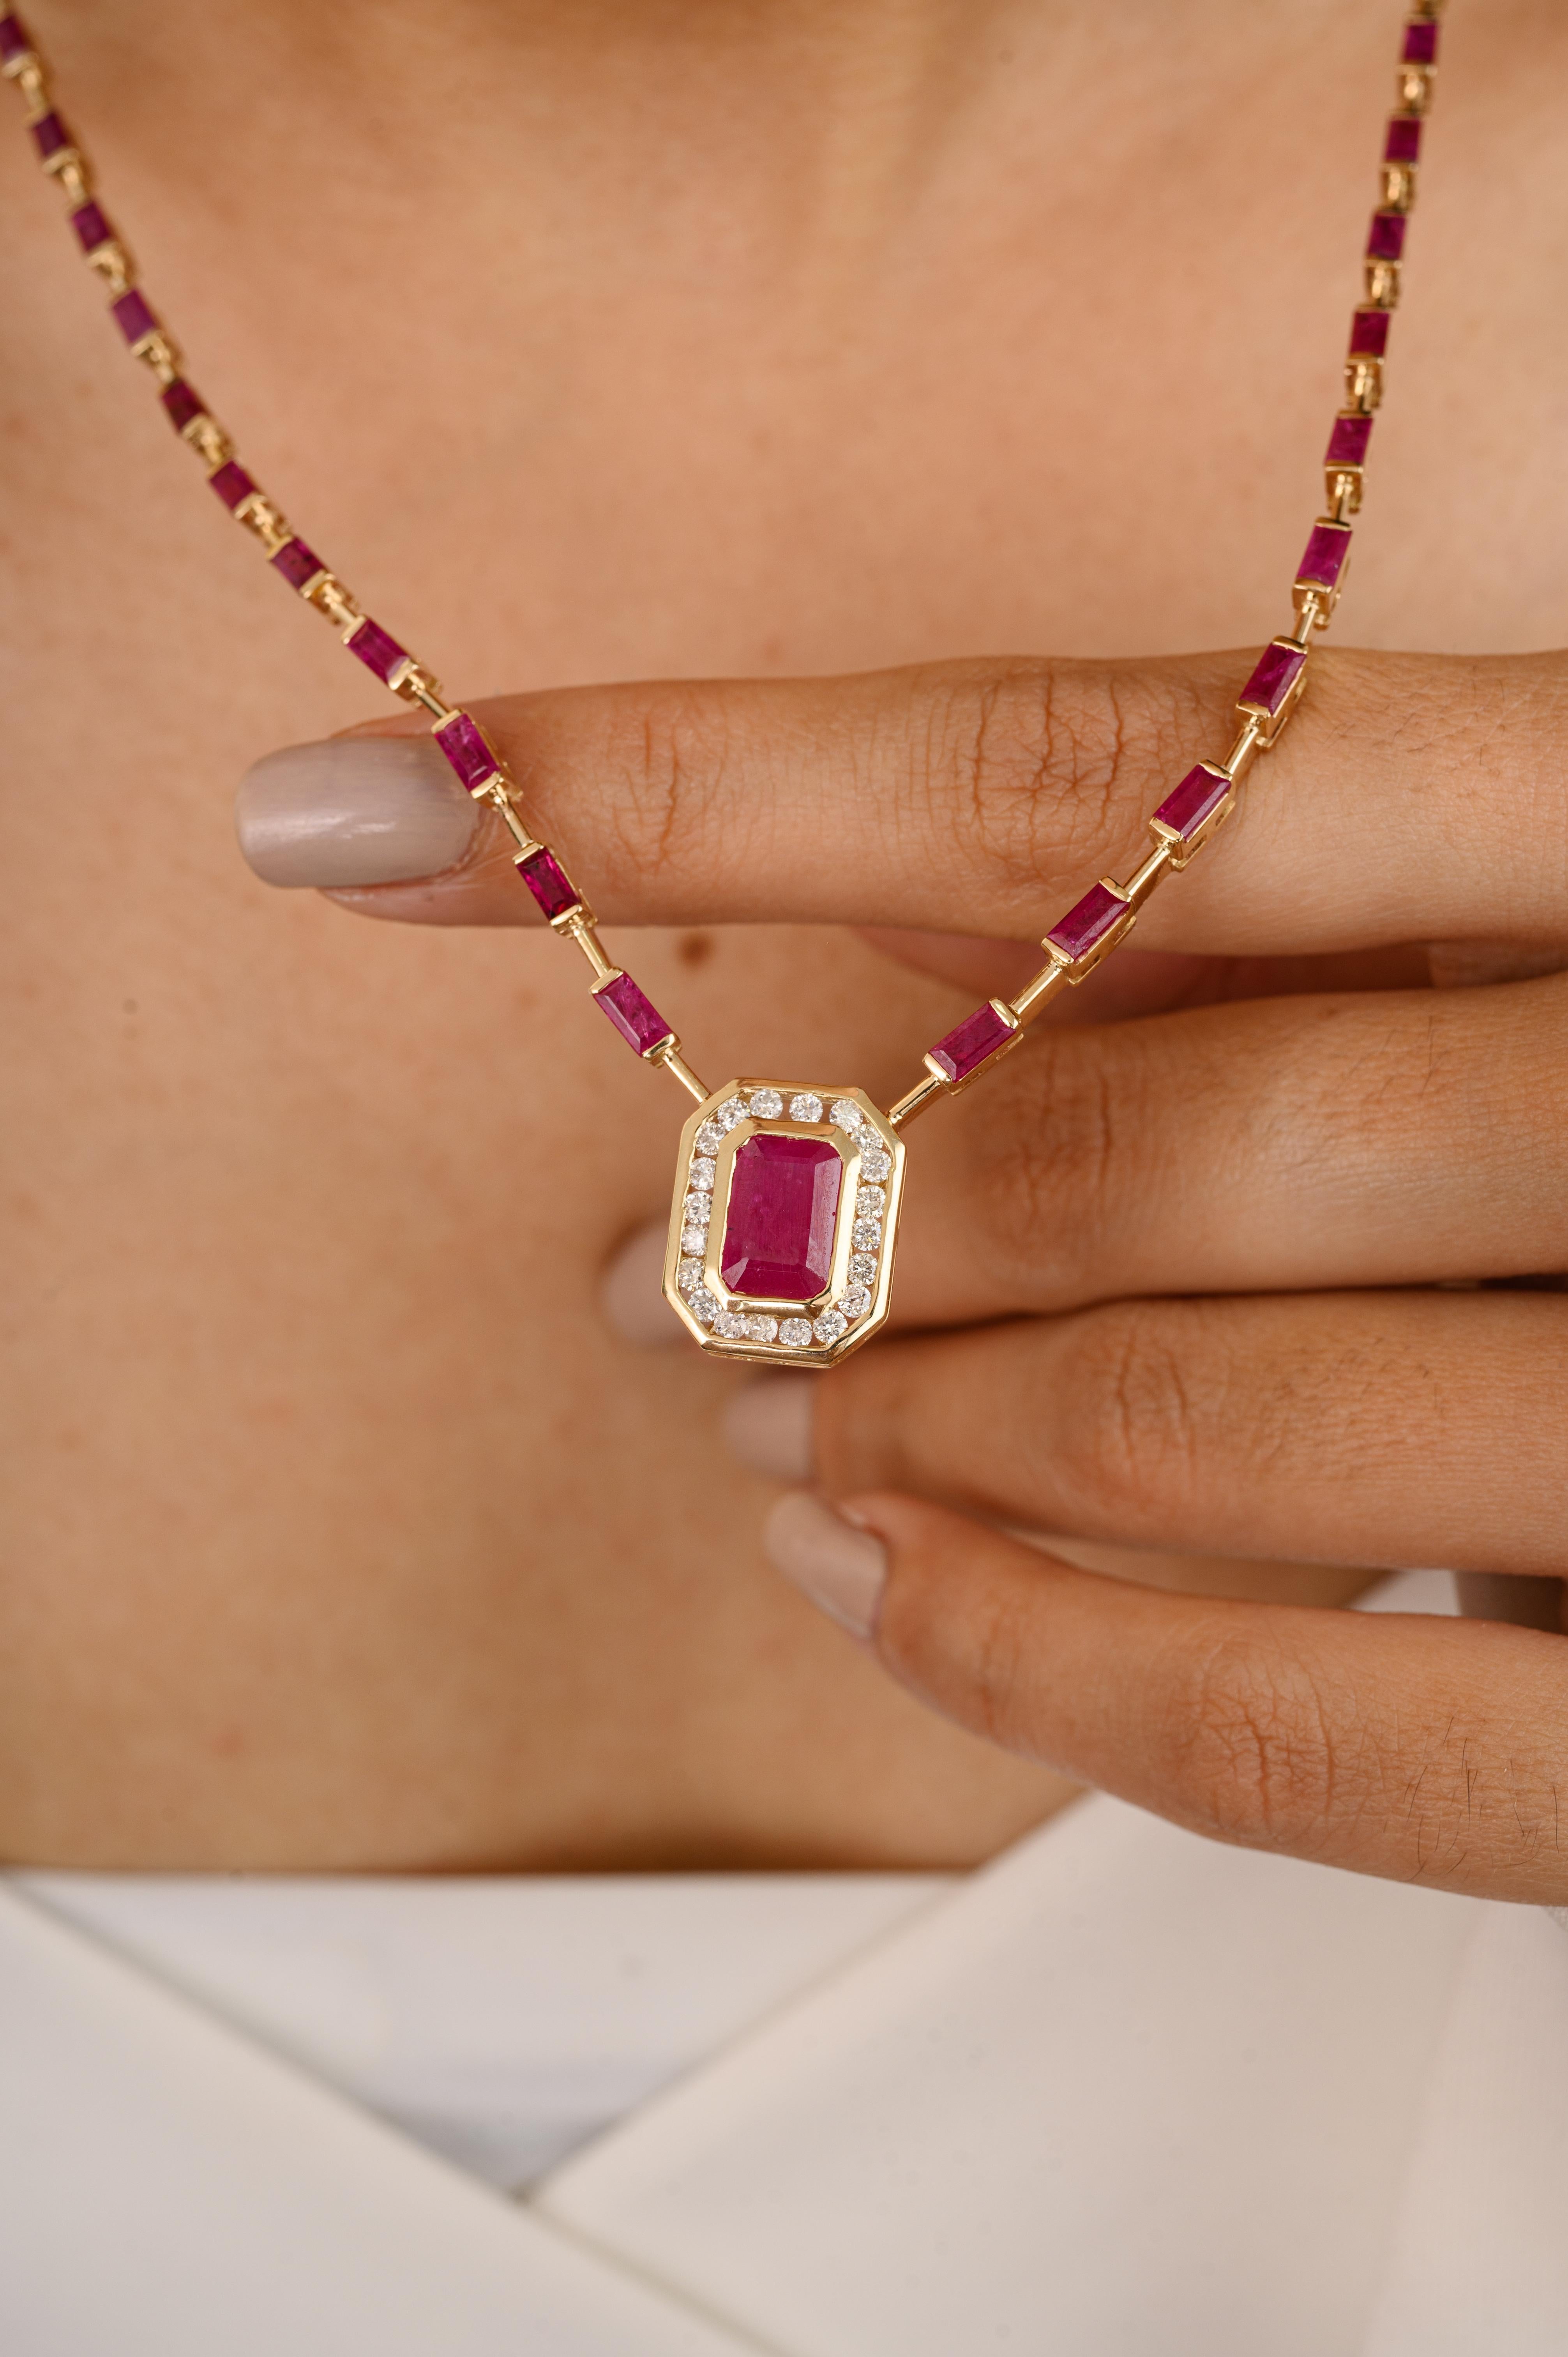 Exquisite 9.8 CTW Ruby Diamond Halo Pendant Necklace in 14K Gold studded with octagon and baguette cut ruby and round diamonds. This stunning piece of jewelry instantly elevates a casual look or dressy outfit. 
Ruby improves mental